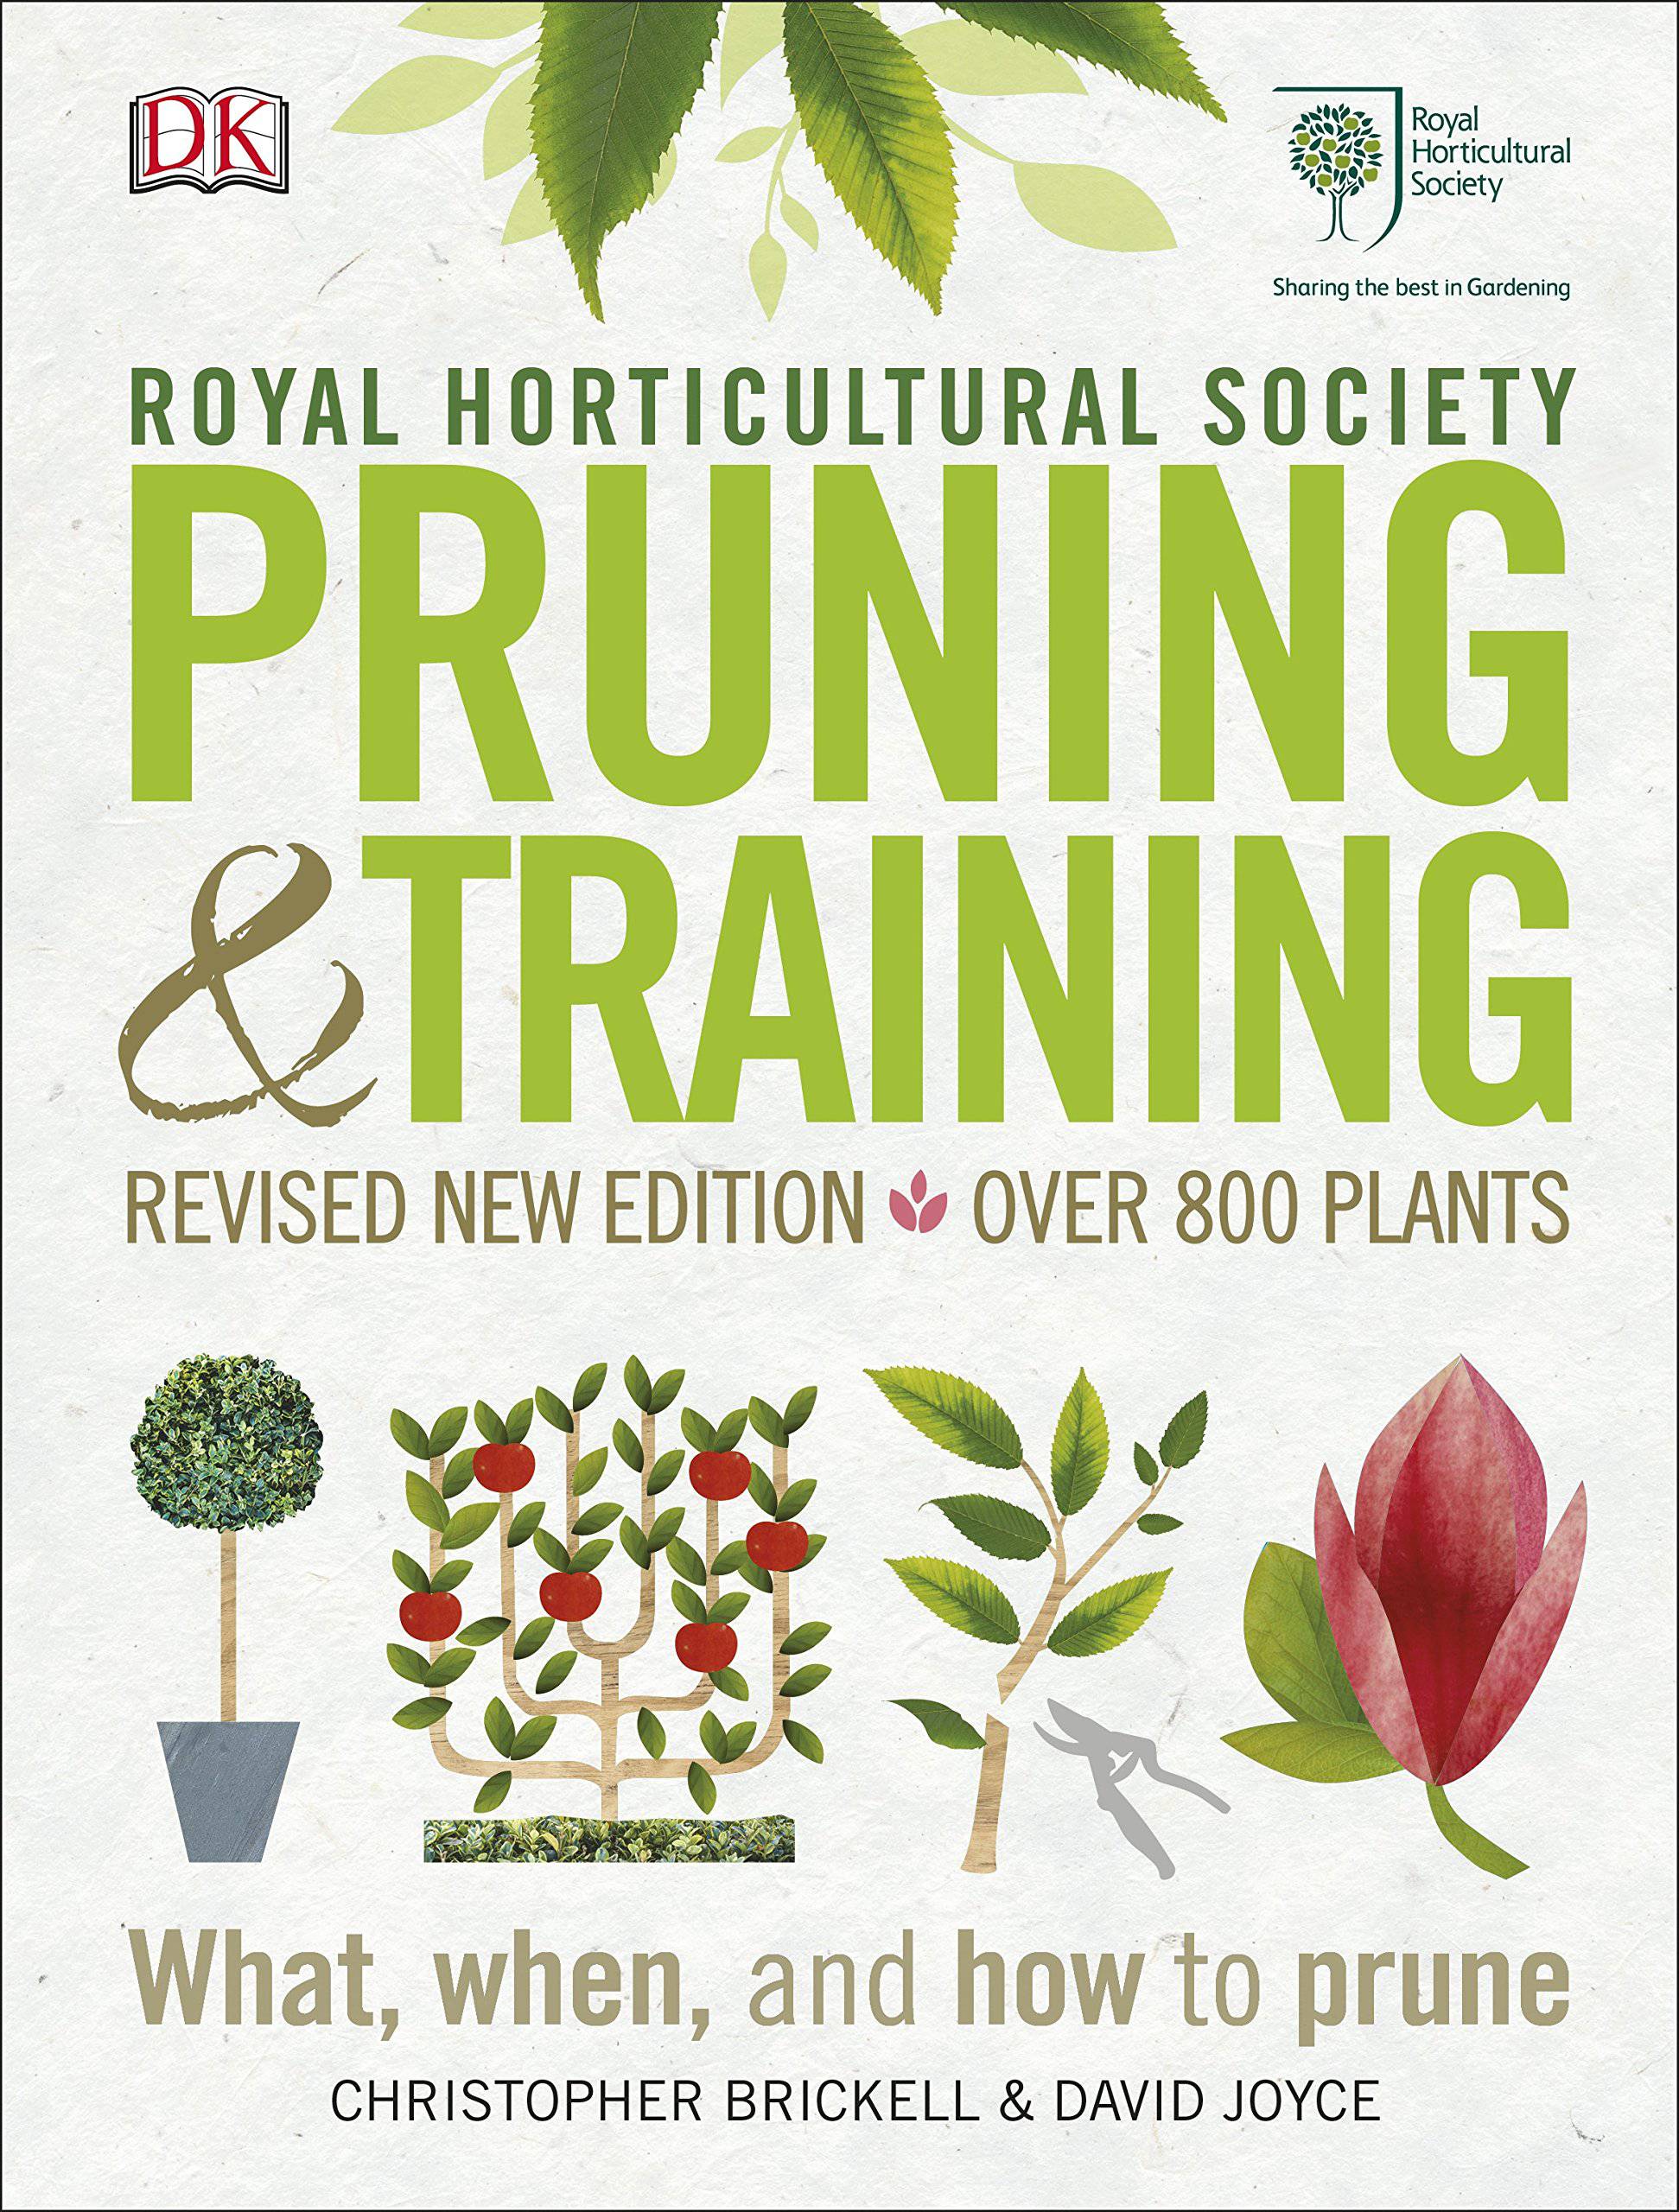 Royal Horticultural Society Pruning and training by Christopher Brickell & David Joyce